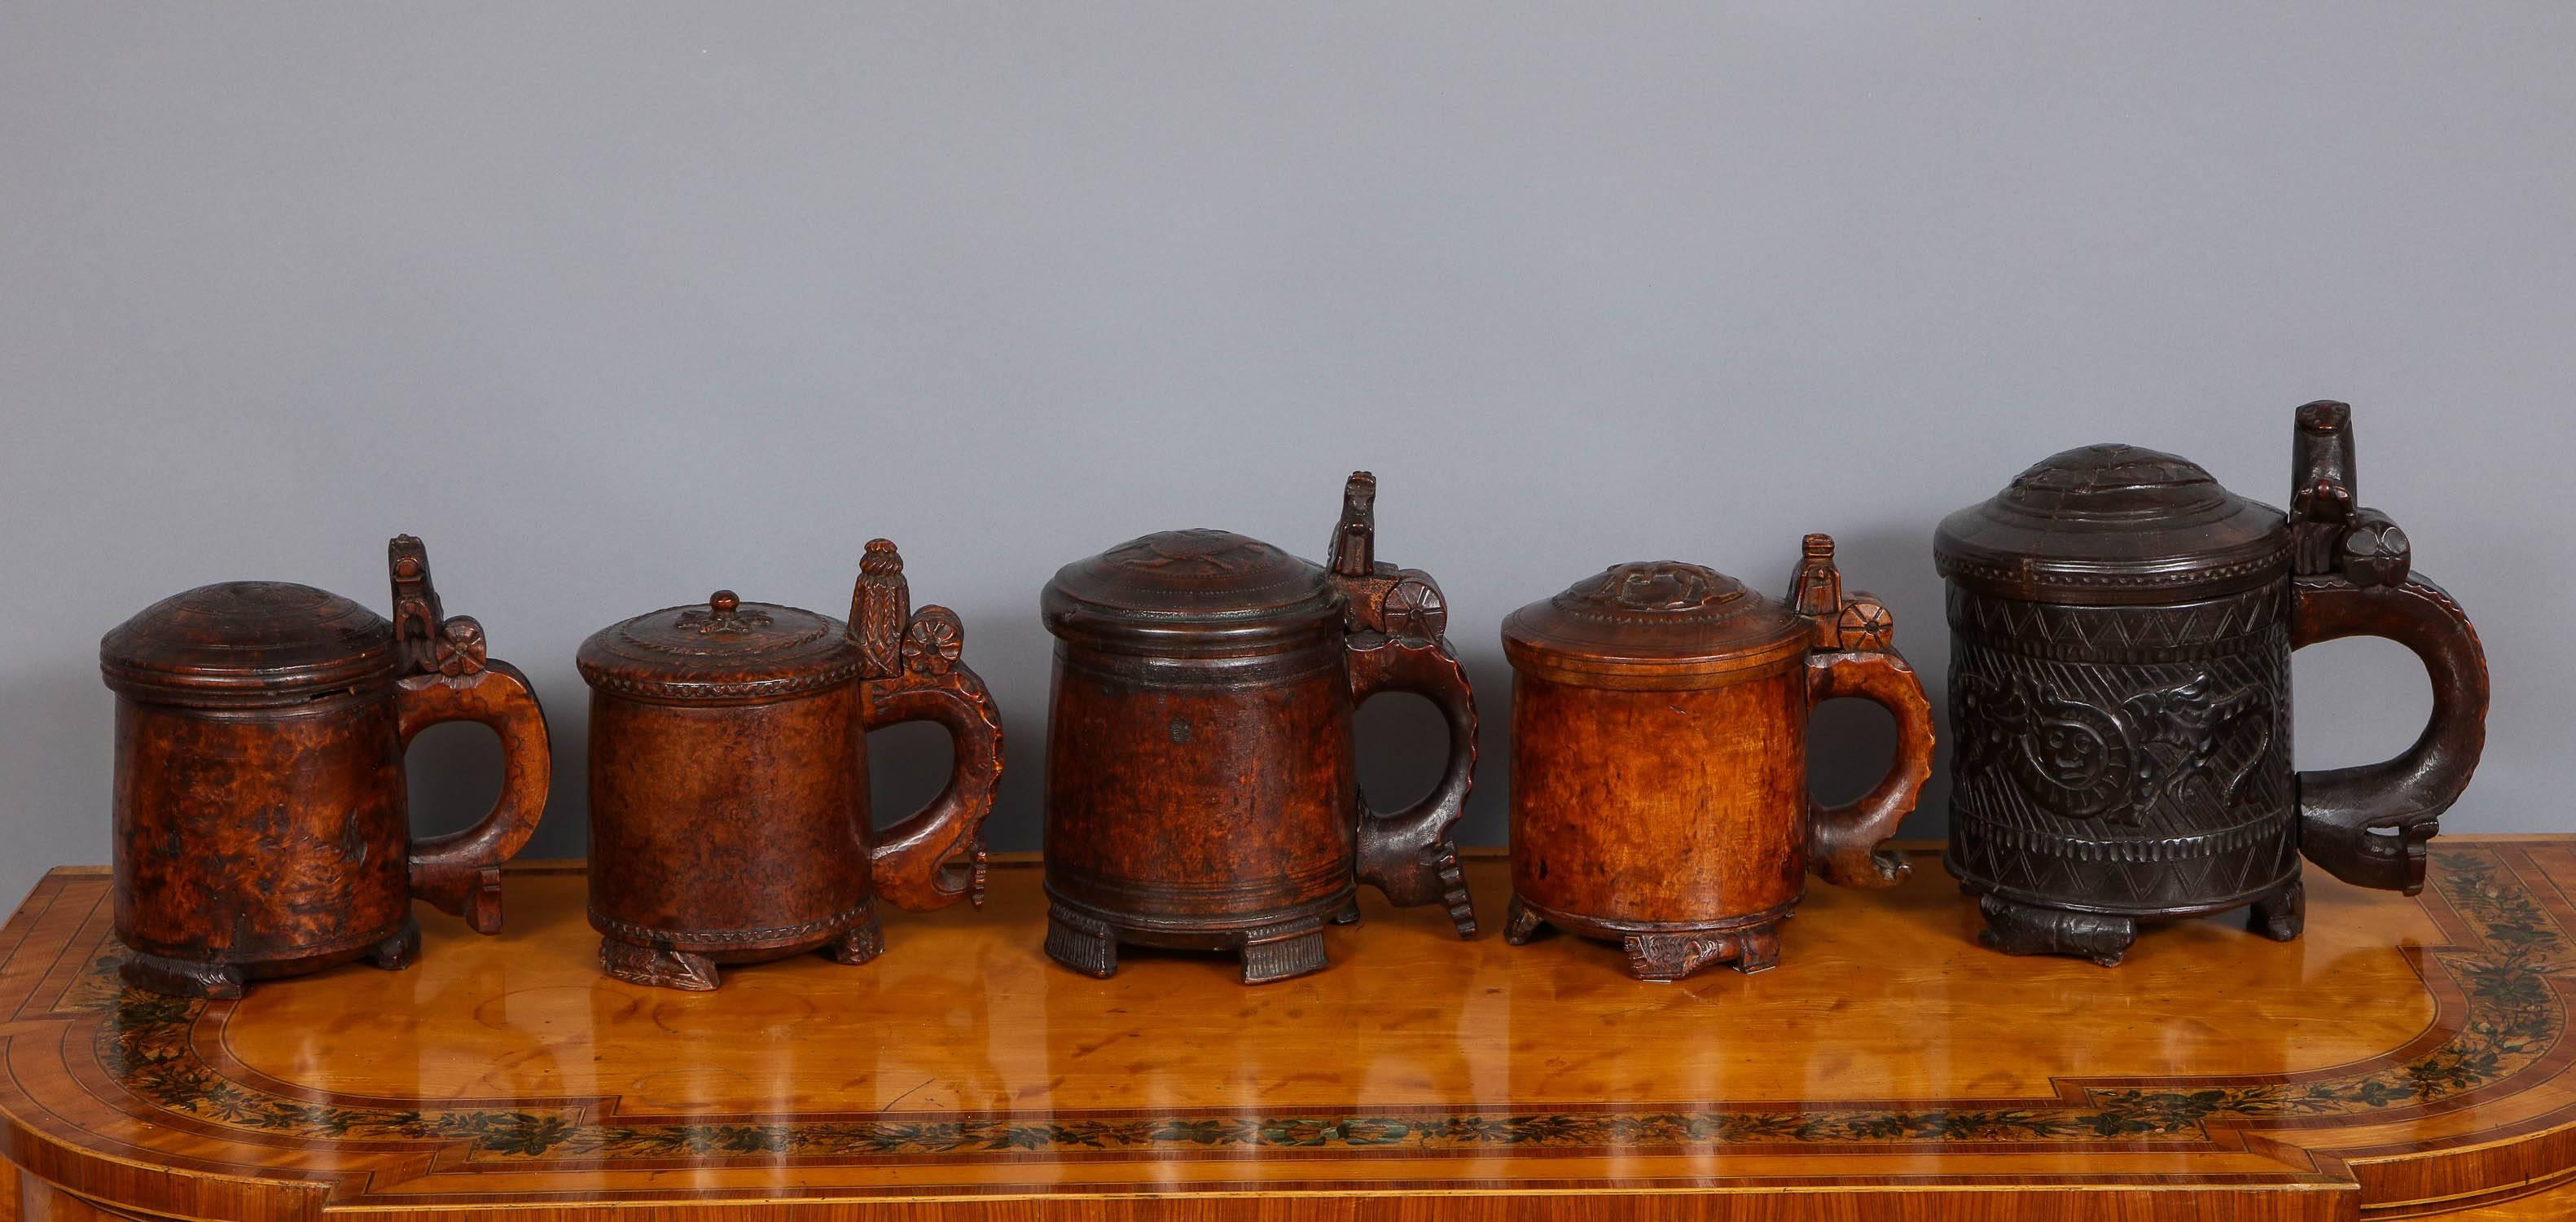 Fine collection of Norwegian peg tankards, circa 1770-1820, most with lion carved handles, all but one fashioned from burl birch wood and all possessing good rich color. The largest is unusual not just for the scale, but additionally for the Nordic